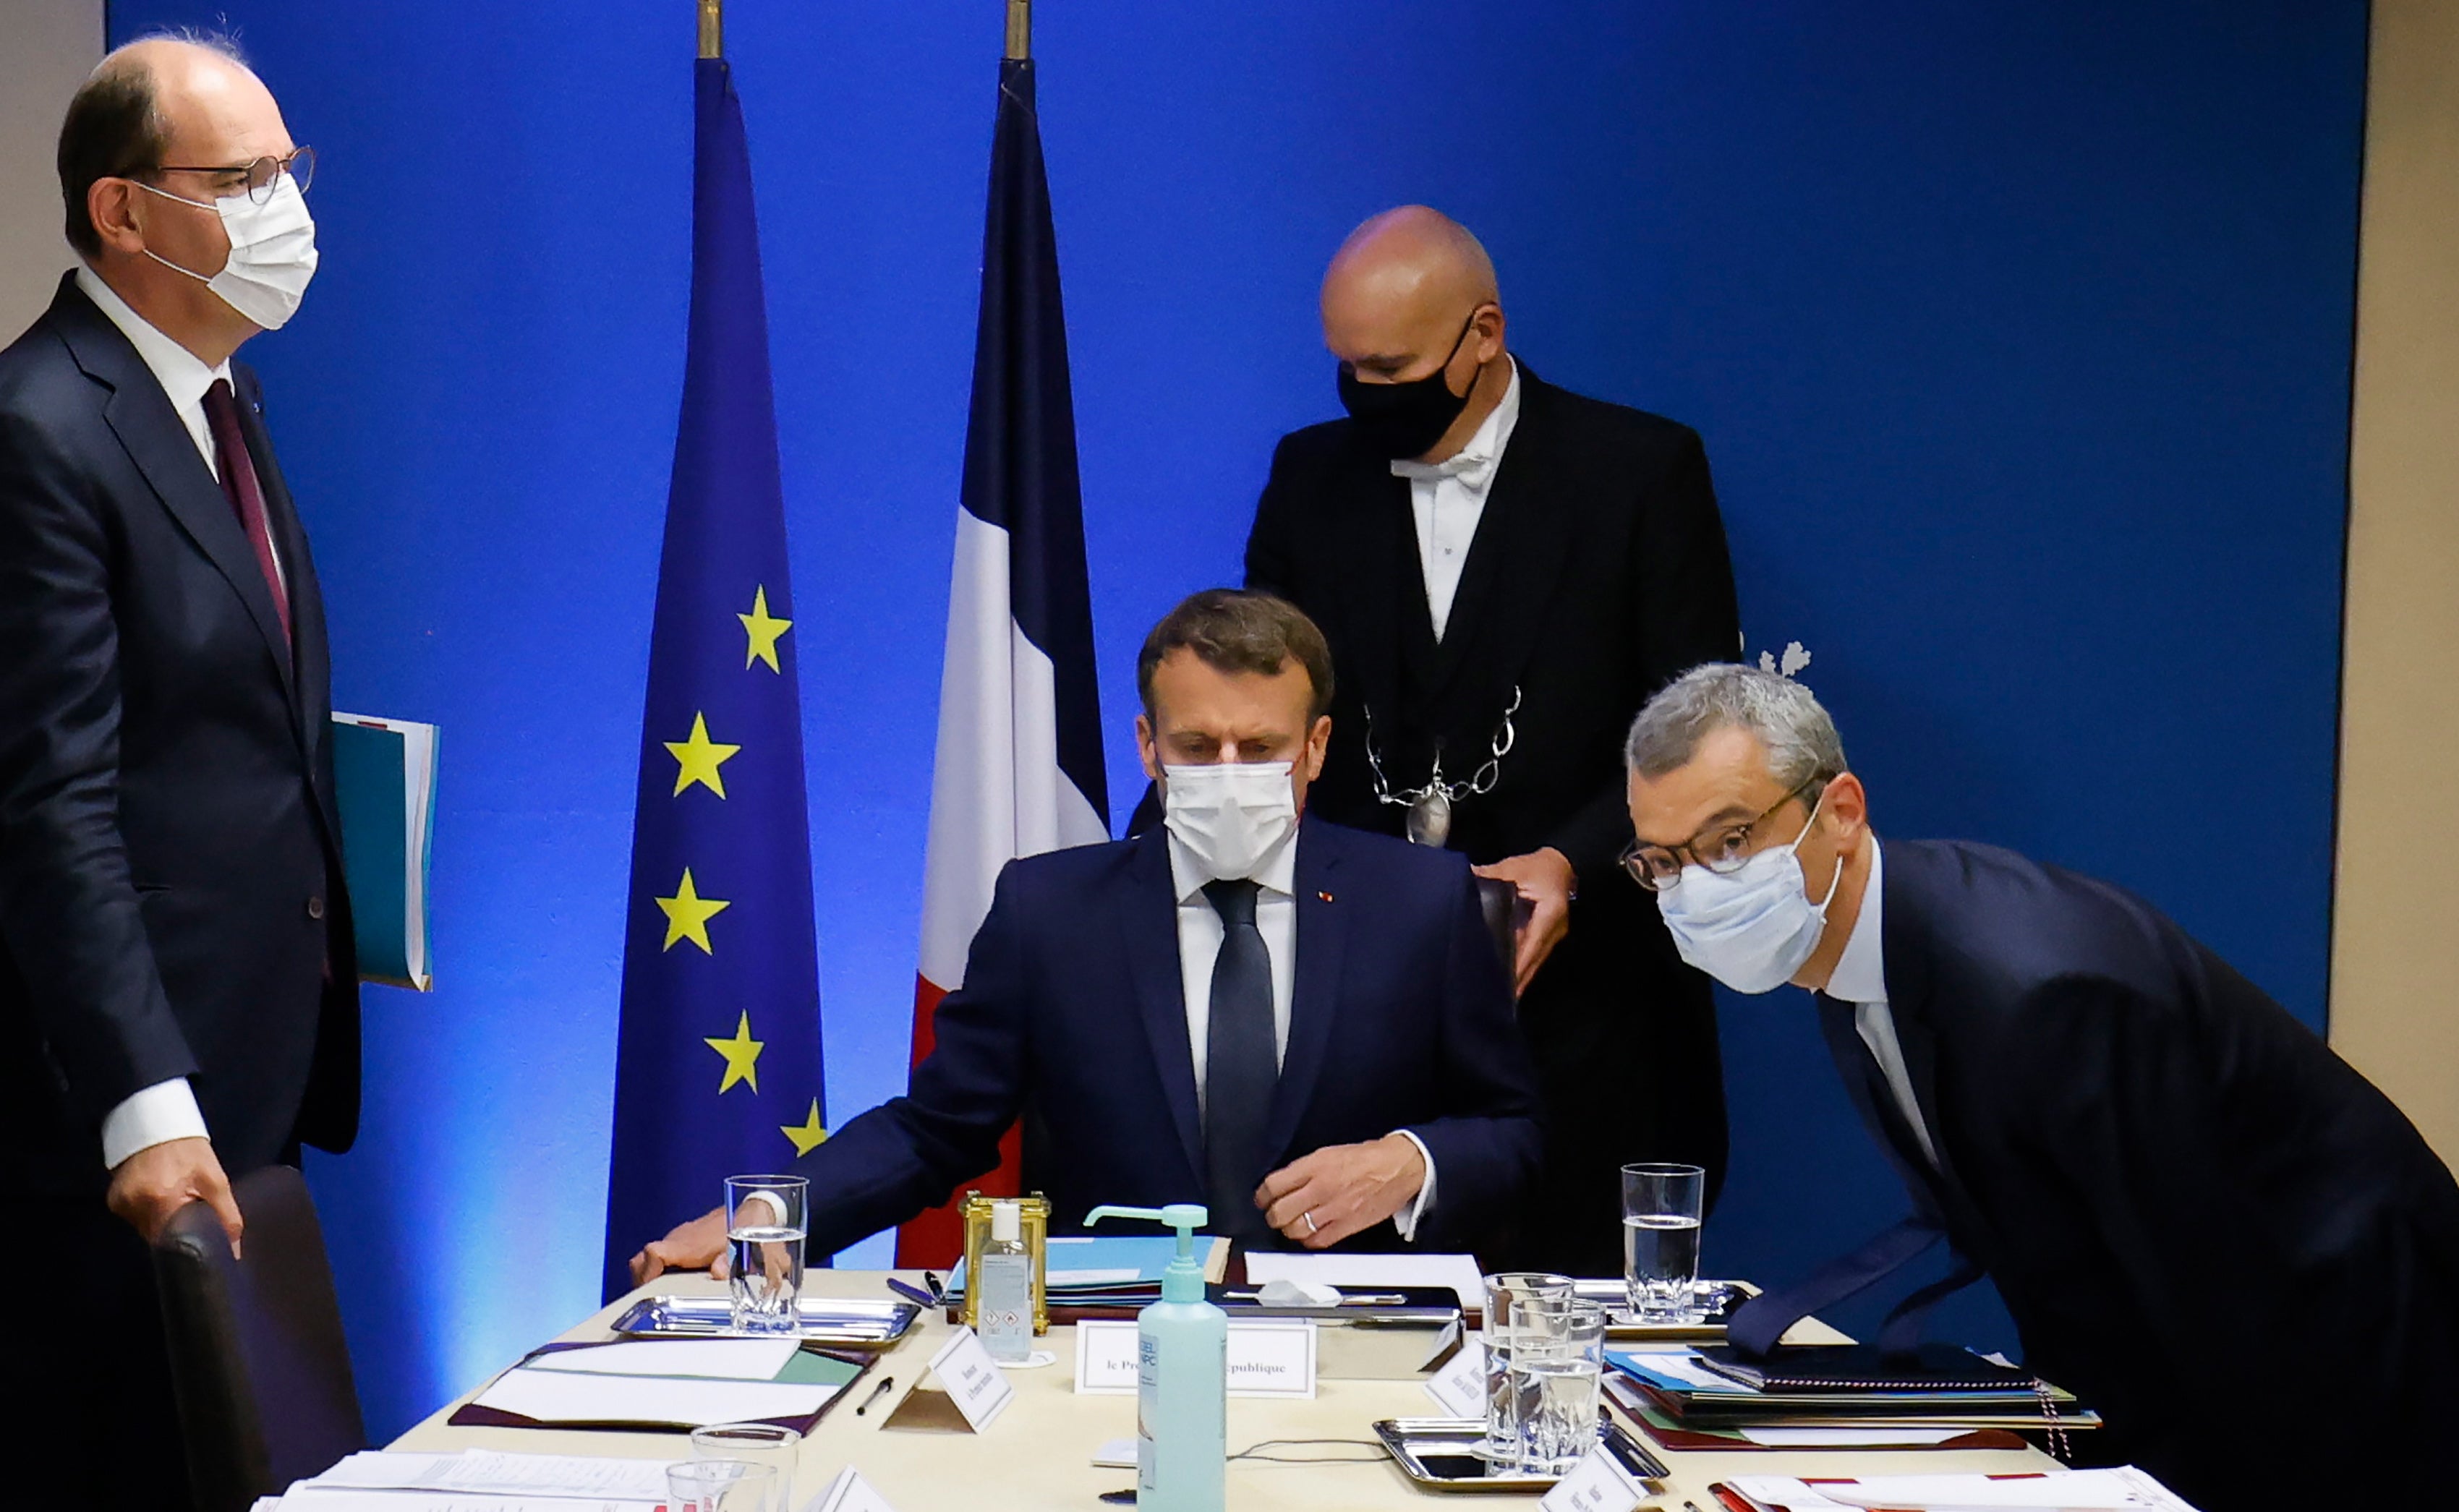 French President Emmanuel Macron (C) flanked by French Prime Minister Jean Castex (L) and Secretary General of the Elysee Palace Alexis Kohler (R) starts a national security meeting to discuss Pegasus spyware in the Jupiter room at The Elysee Presidential Palace in Paris, France, 22 July 2021